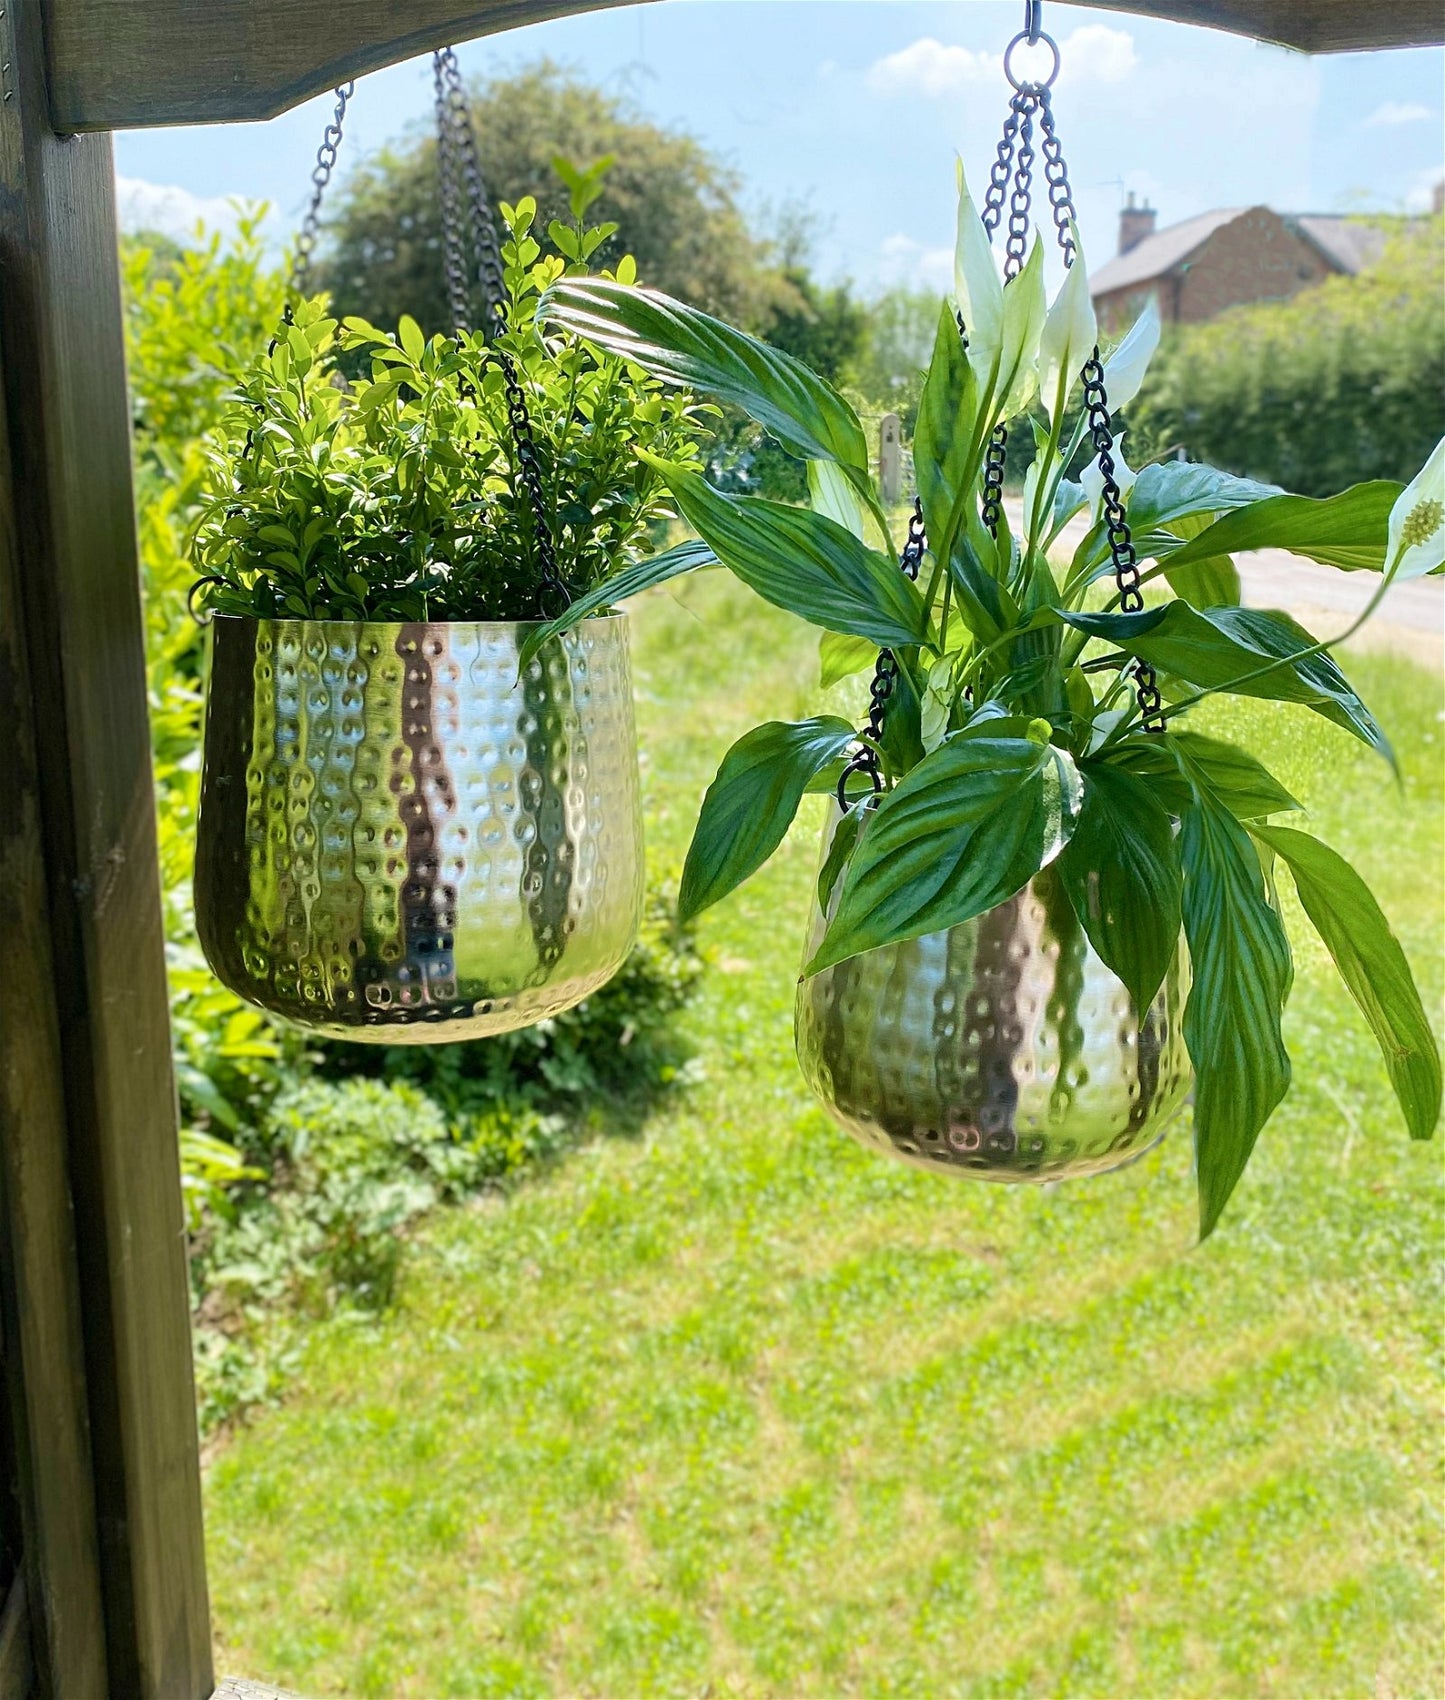 Set of Two Hanging Hammered Planters